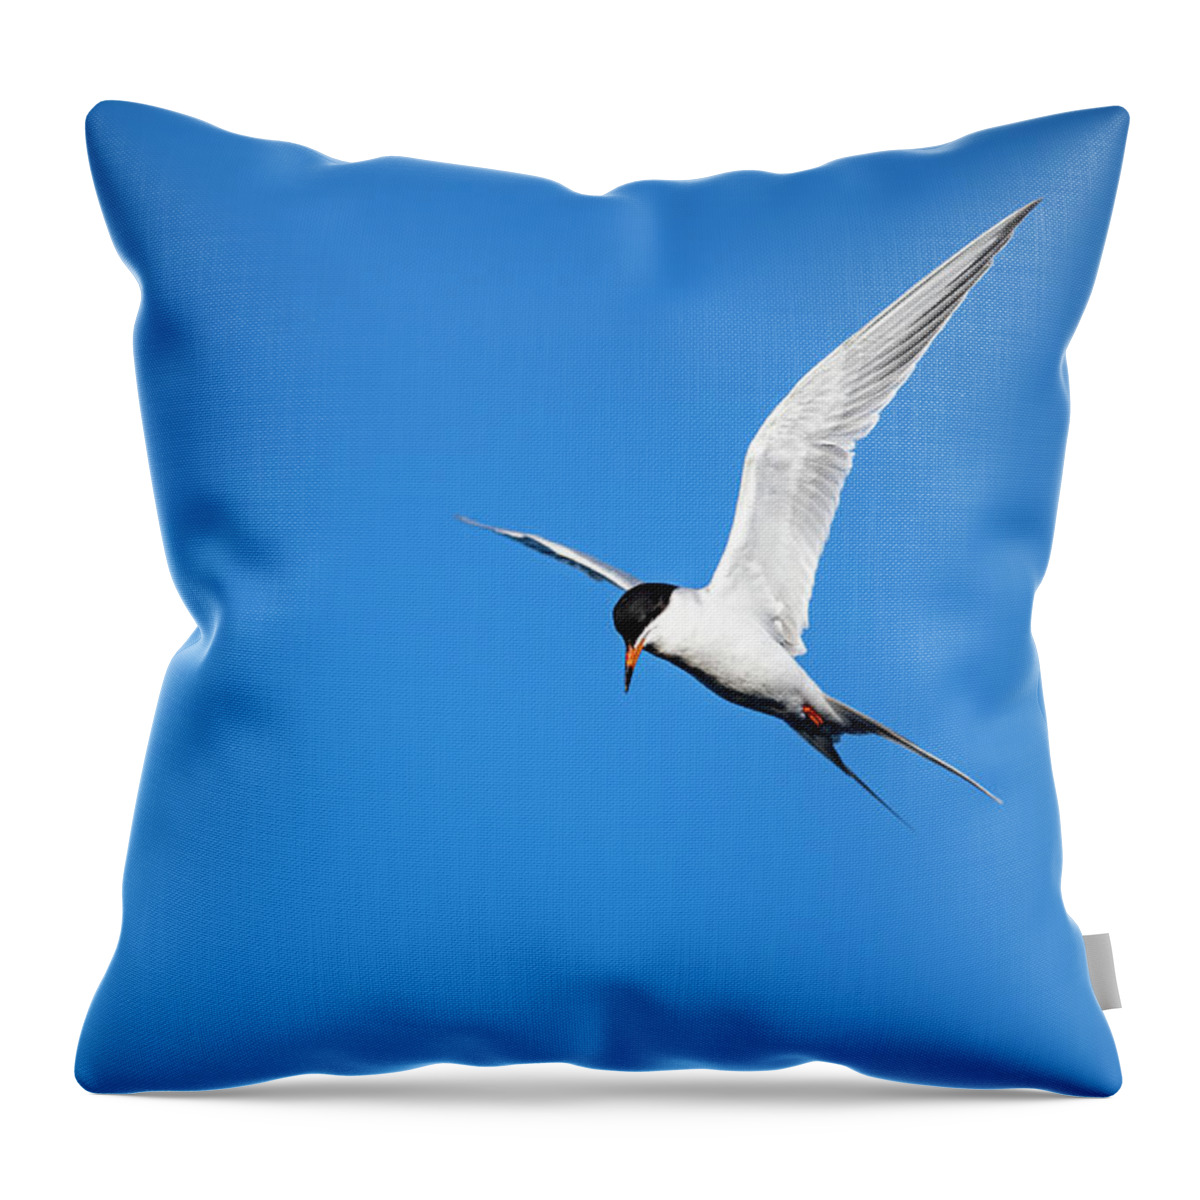 Common Tern Throw Pillow featuring the photograph Common Tern - Sterna hirundo by Amazing Action Photo Video